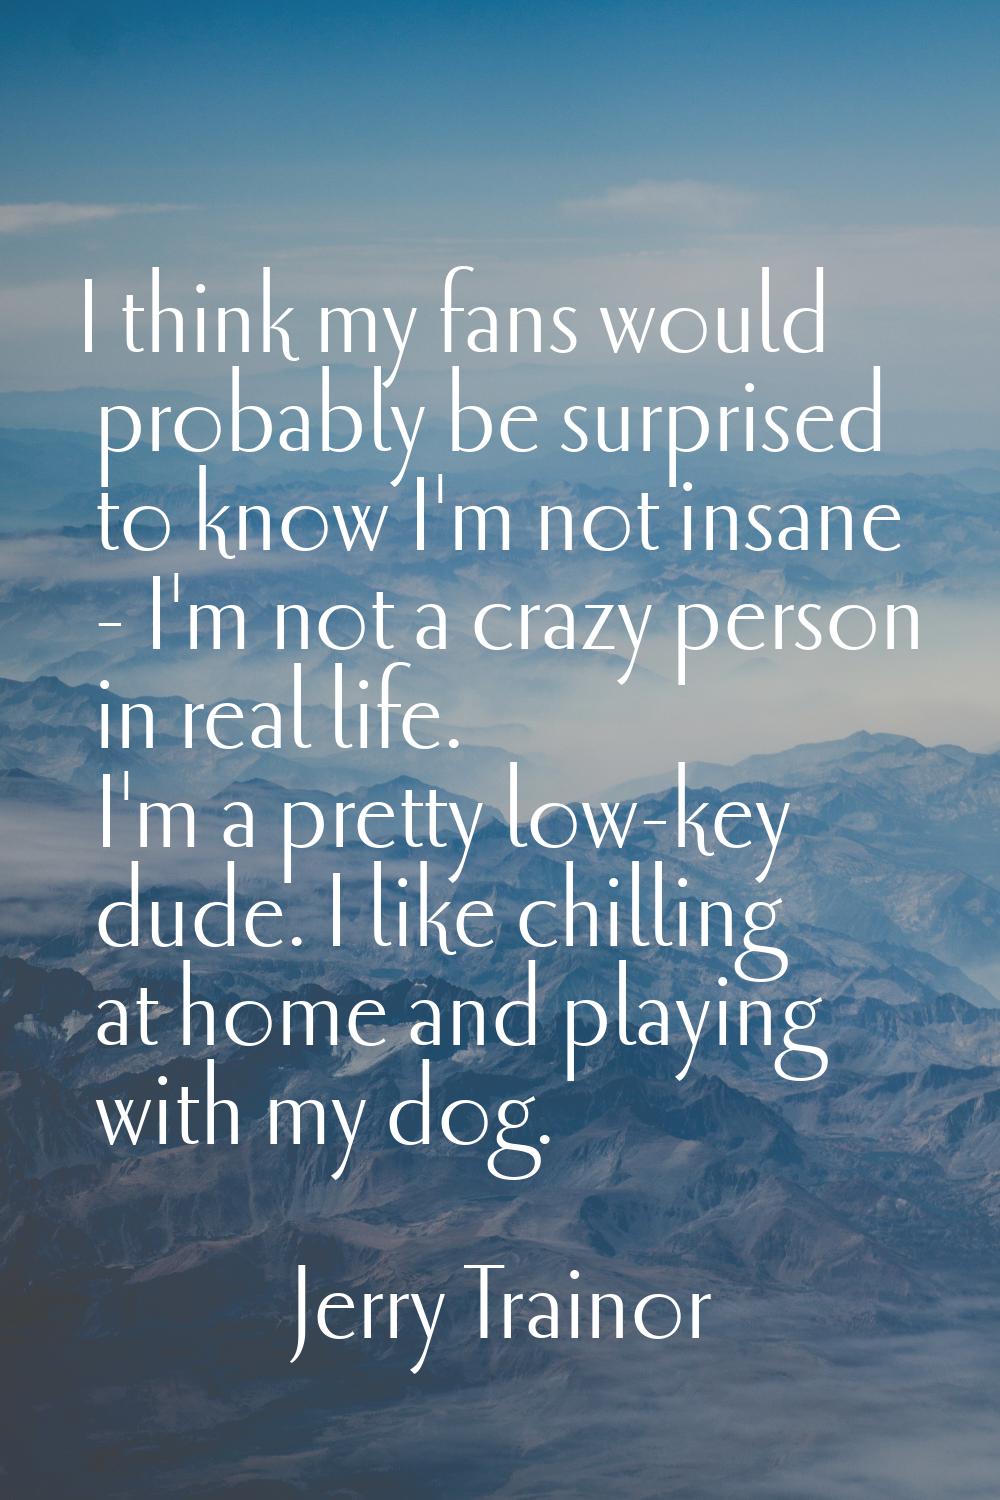 I think my fans would probably be surprised to know I'm not insane - I'm not a crazy person in real